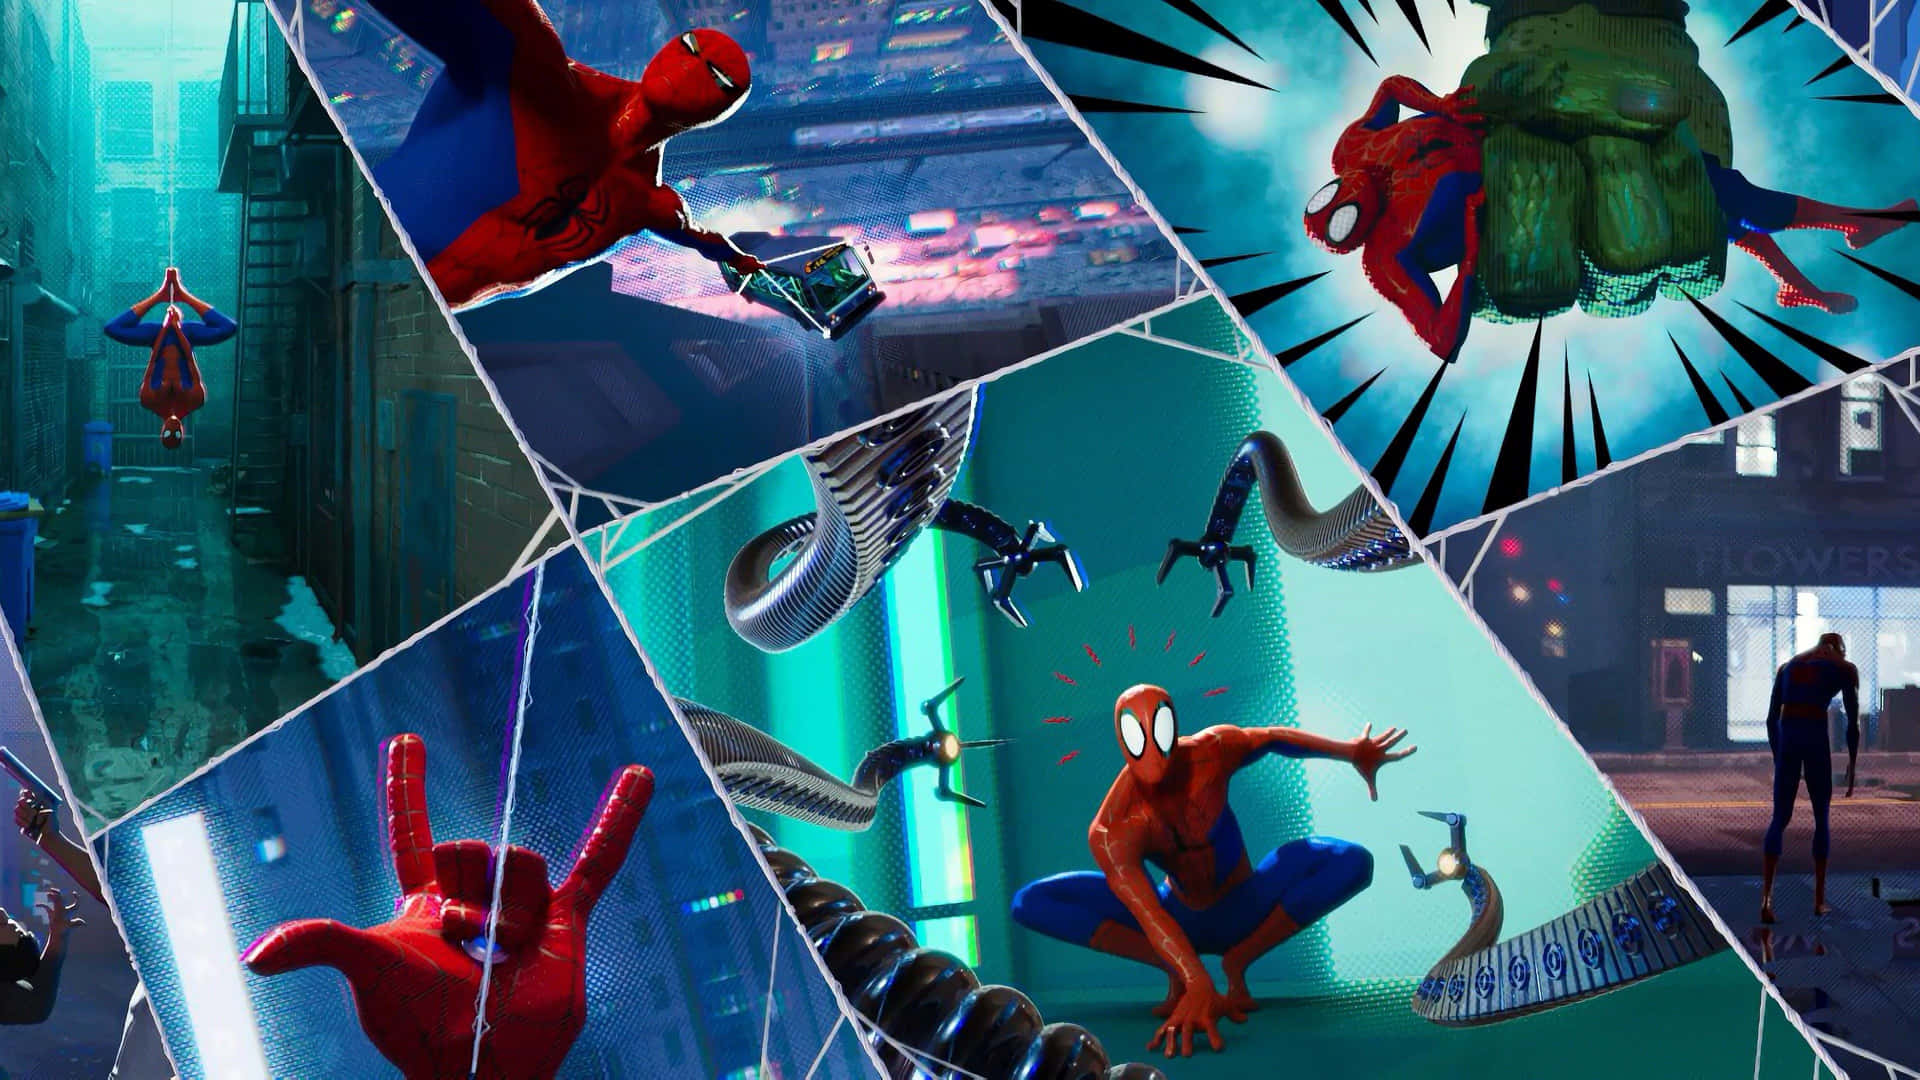 Explore The Thrilling Multiverse With Spider Man In Spider-man: Into The Spider-verse 4k.